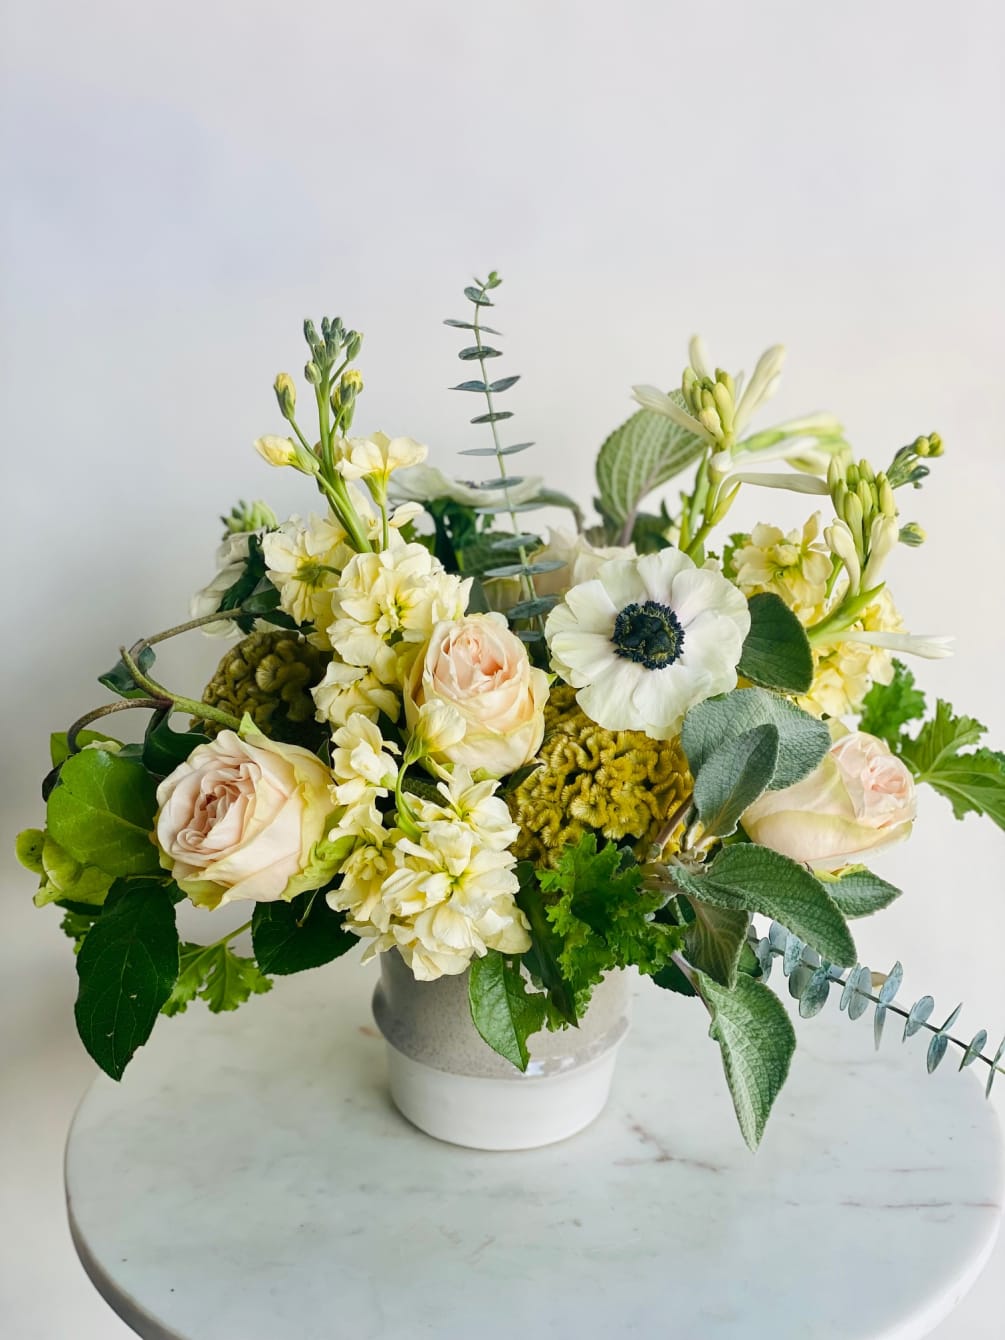 Clean and sophisticated. The freshest seasonal flowers in subtle shades of white